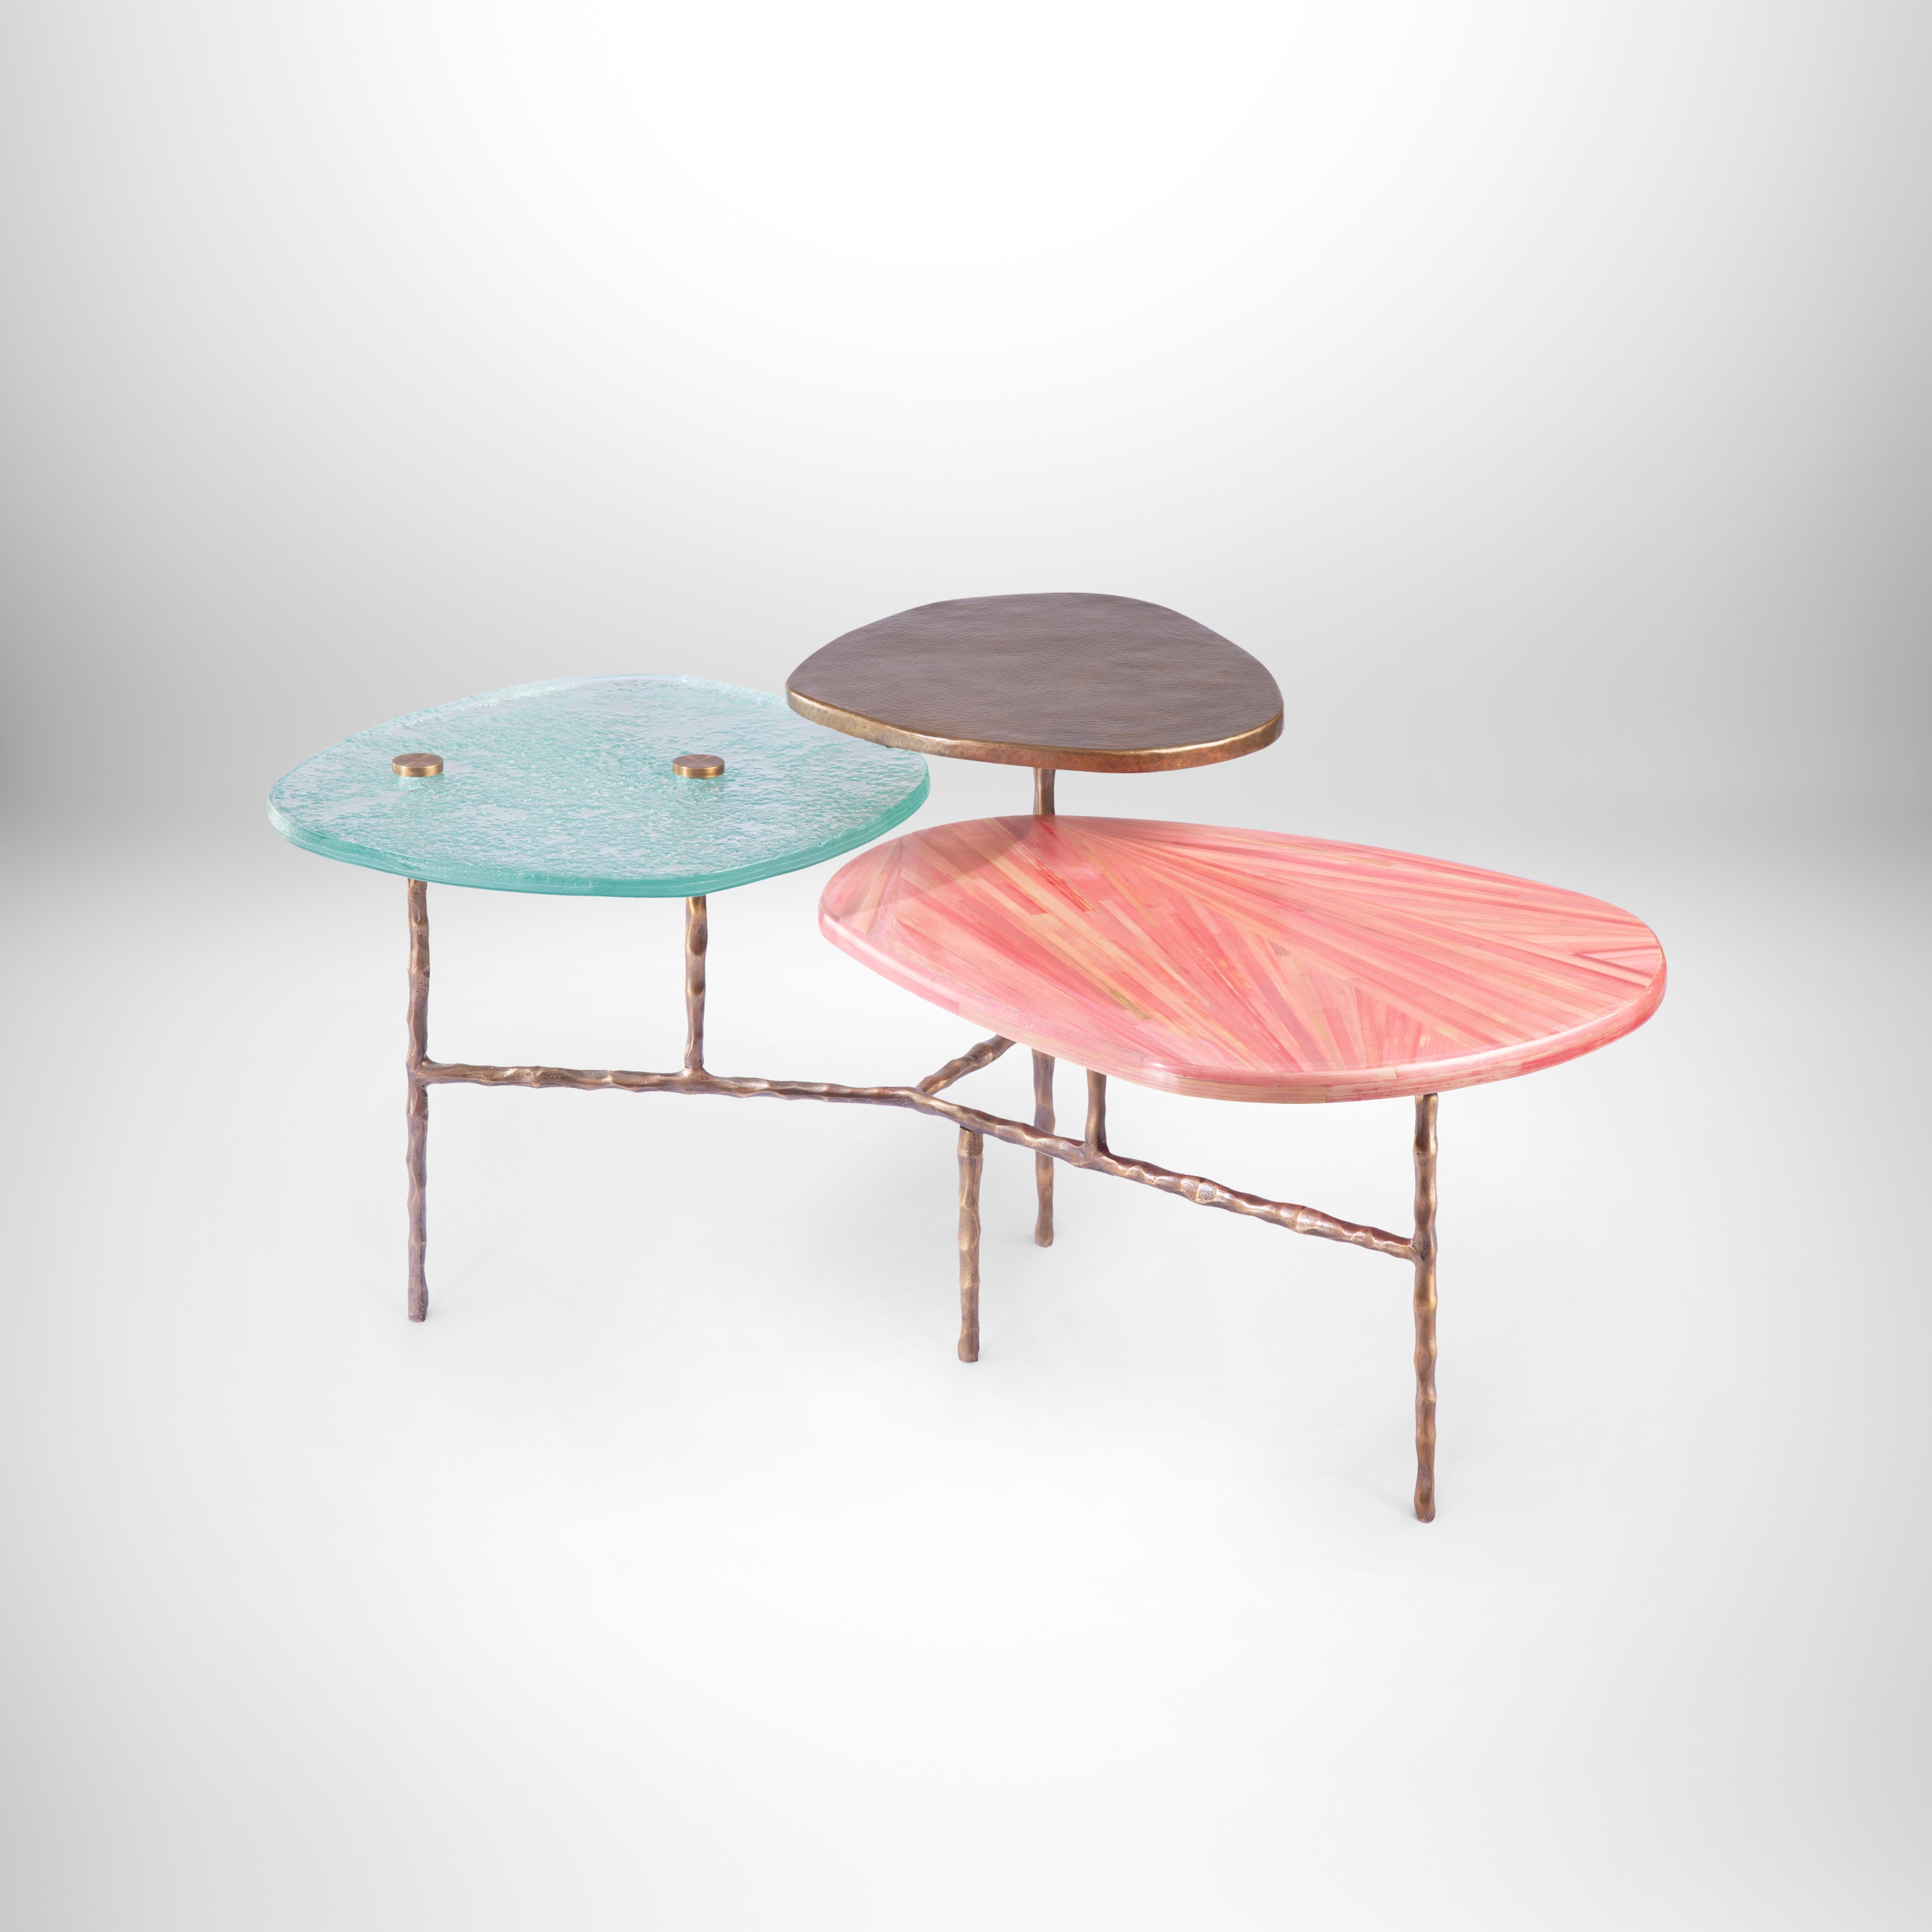 Three-tiered coffee table with hand-laid pink straw, brass & custom-made glass.
This timeless design unites beauty, class and pragmatism. Three tiered pedals resemble that of a flower each made from a different material that complements each other.